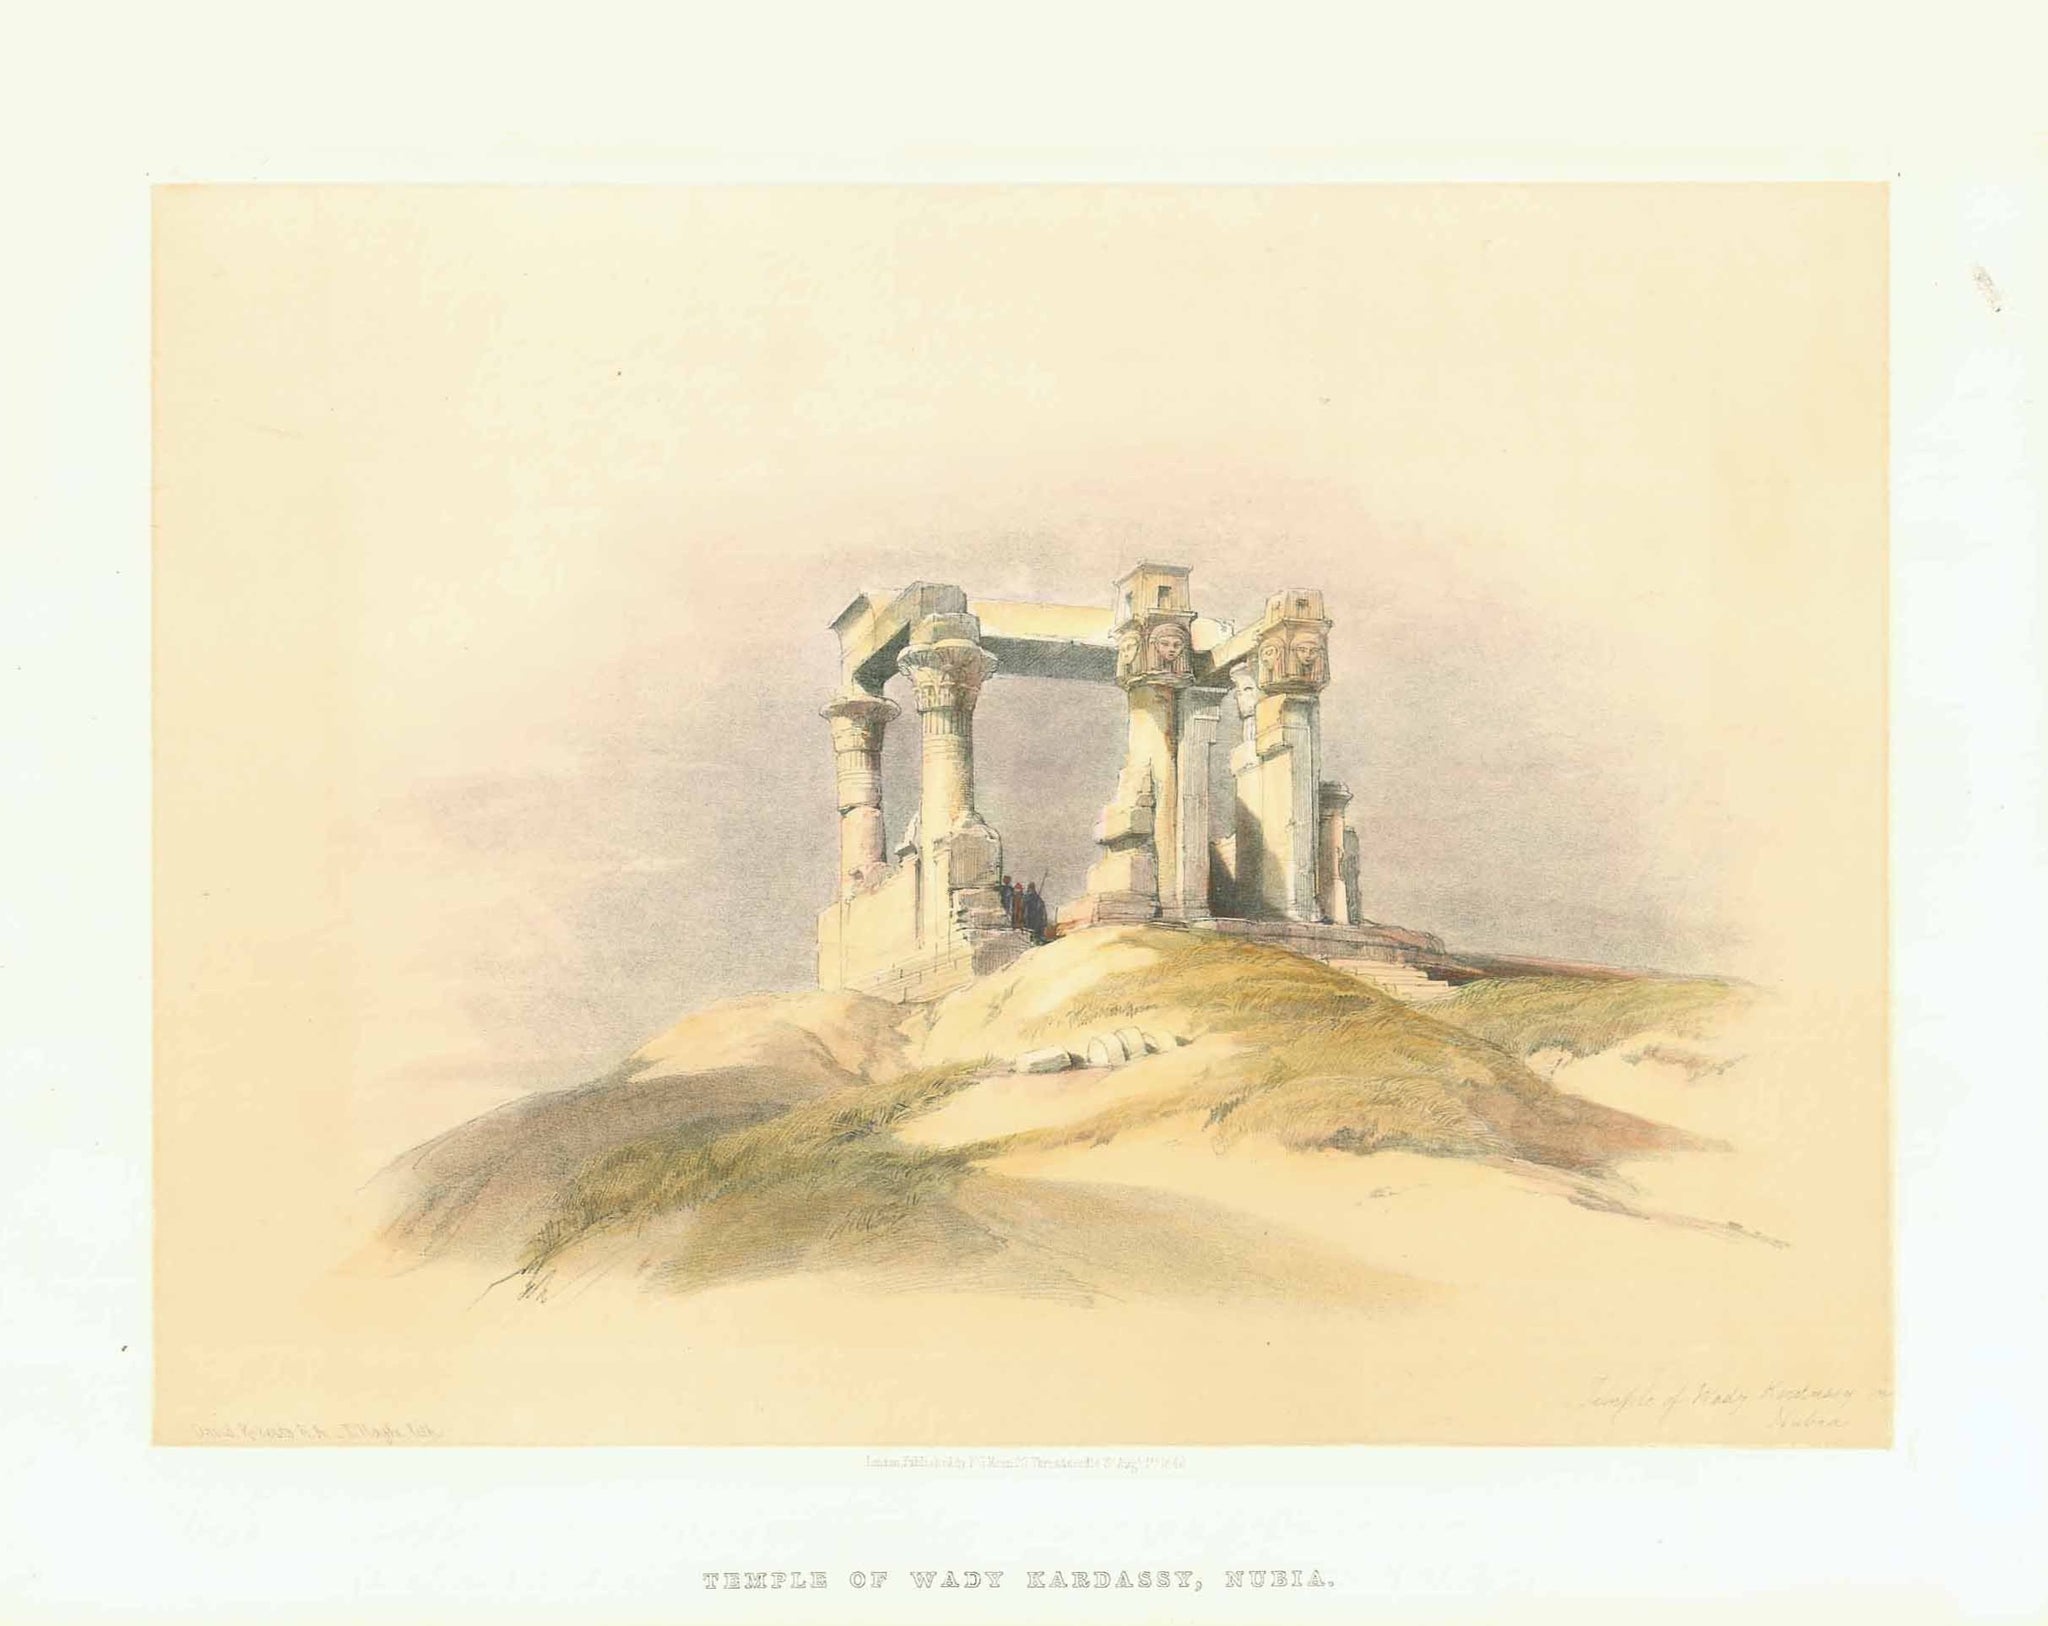 "Temple of Wady Kardassy, Nubia"  Published Aug. 1st. 1846. Minor signs of age in margins. Half page. Reverse side is printed.  Image: 25 x 34.5 cm (9.8x 13.5")  Original Antique Lithographs  by David Roberts  (1796 Edinburgh - London 1864). interior design, wall decoration, ideas, idea, gift ideas, present, vintage, charming, special, decoration, home interior, living room design